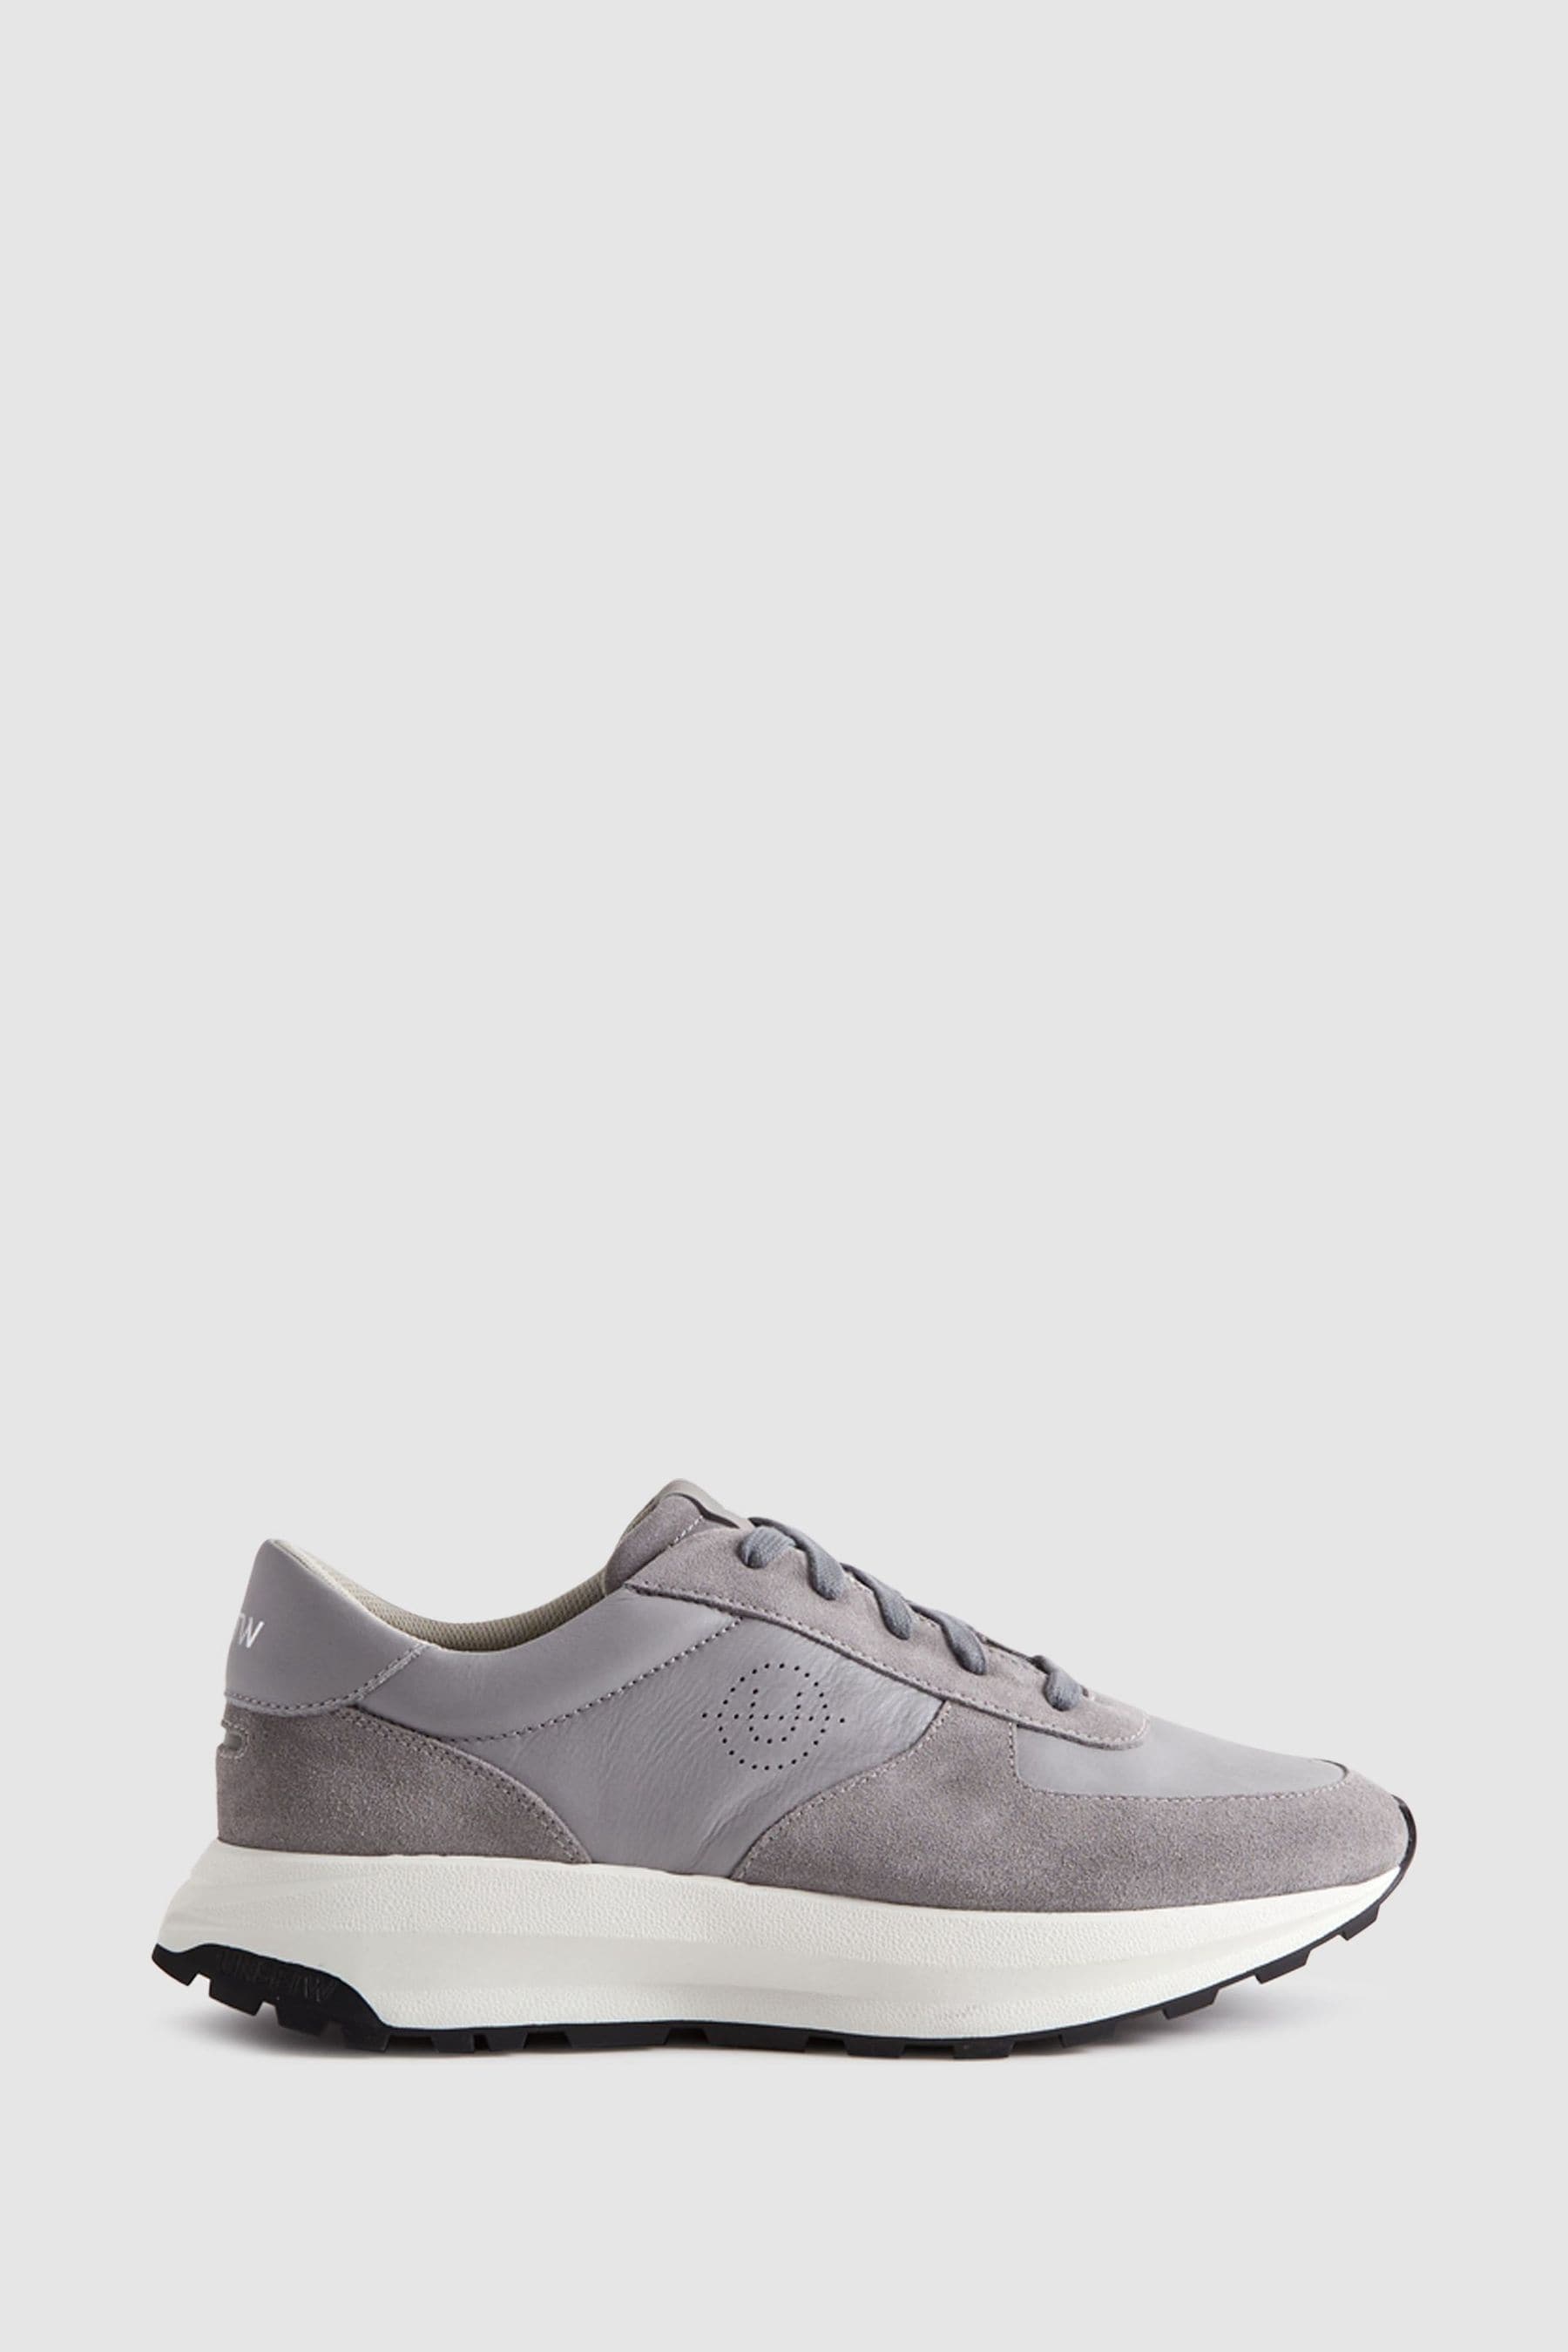 Unseen Footwear Suede Trinity Stamp Trainers In Grey/white